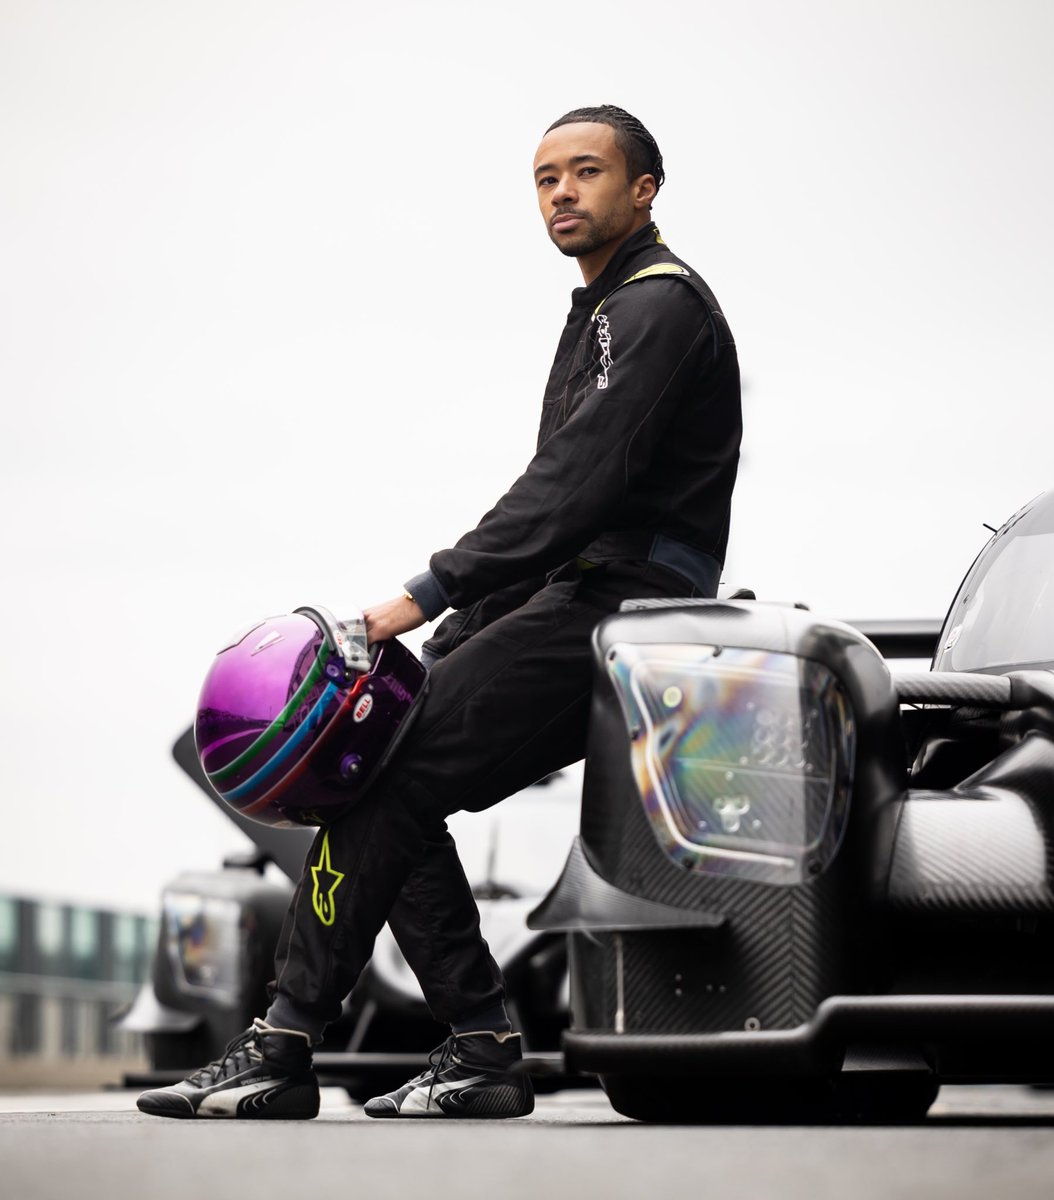 Back where it all BegJann! @Jannthaman will make his #BritishGT return at the #Silverstone500, 12 years after his last appearance with us. And what’s more it’ll be with his former team, RJN. FULL STORY britishgt.com/news/1050